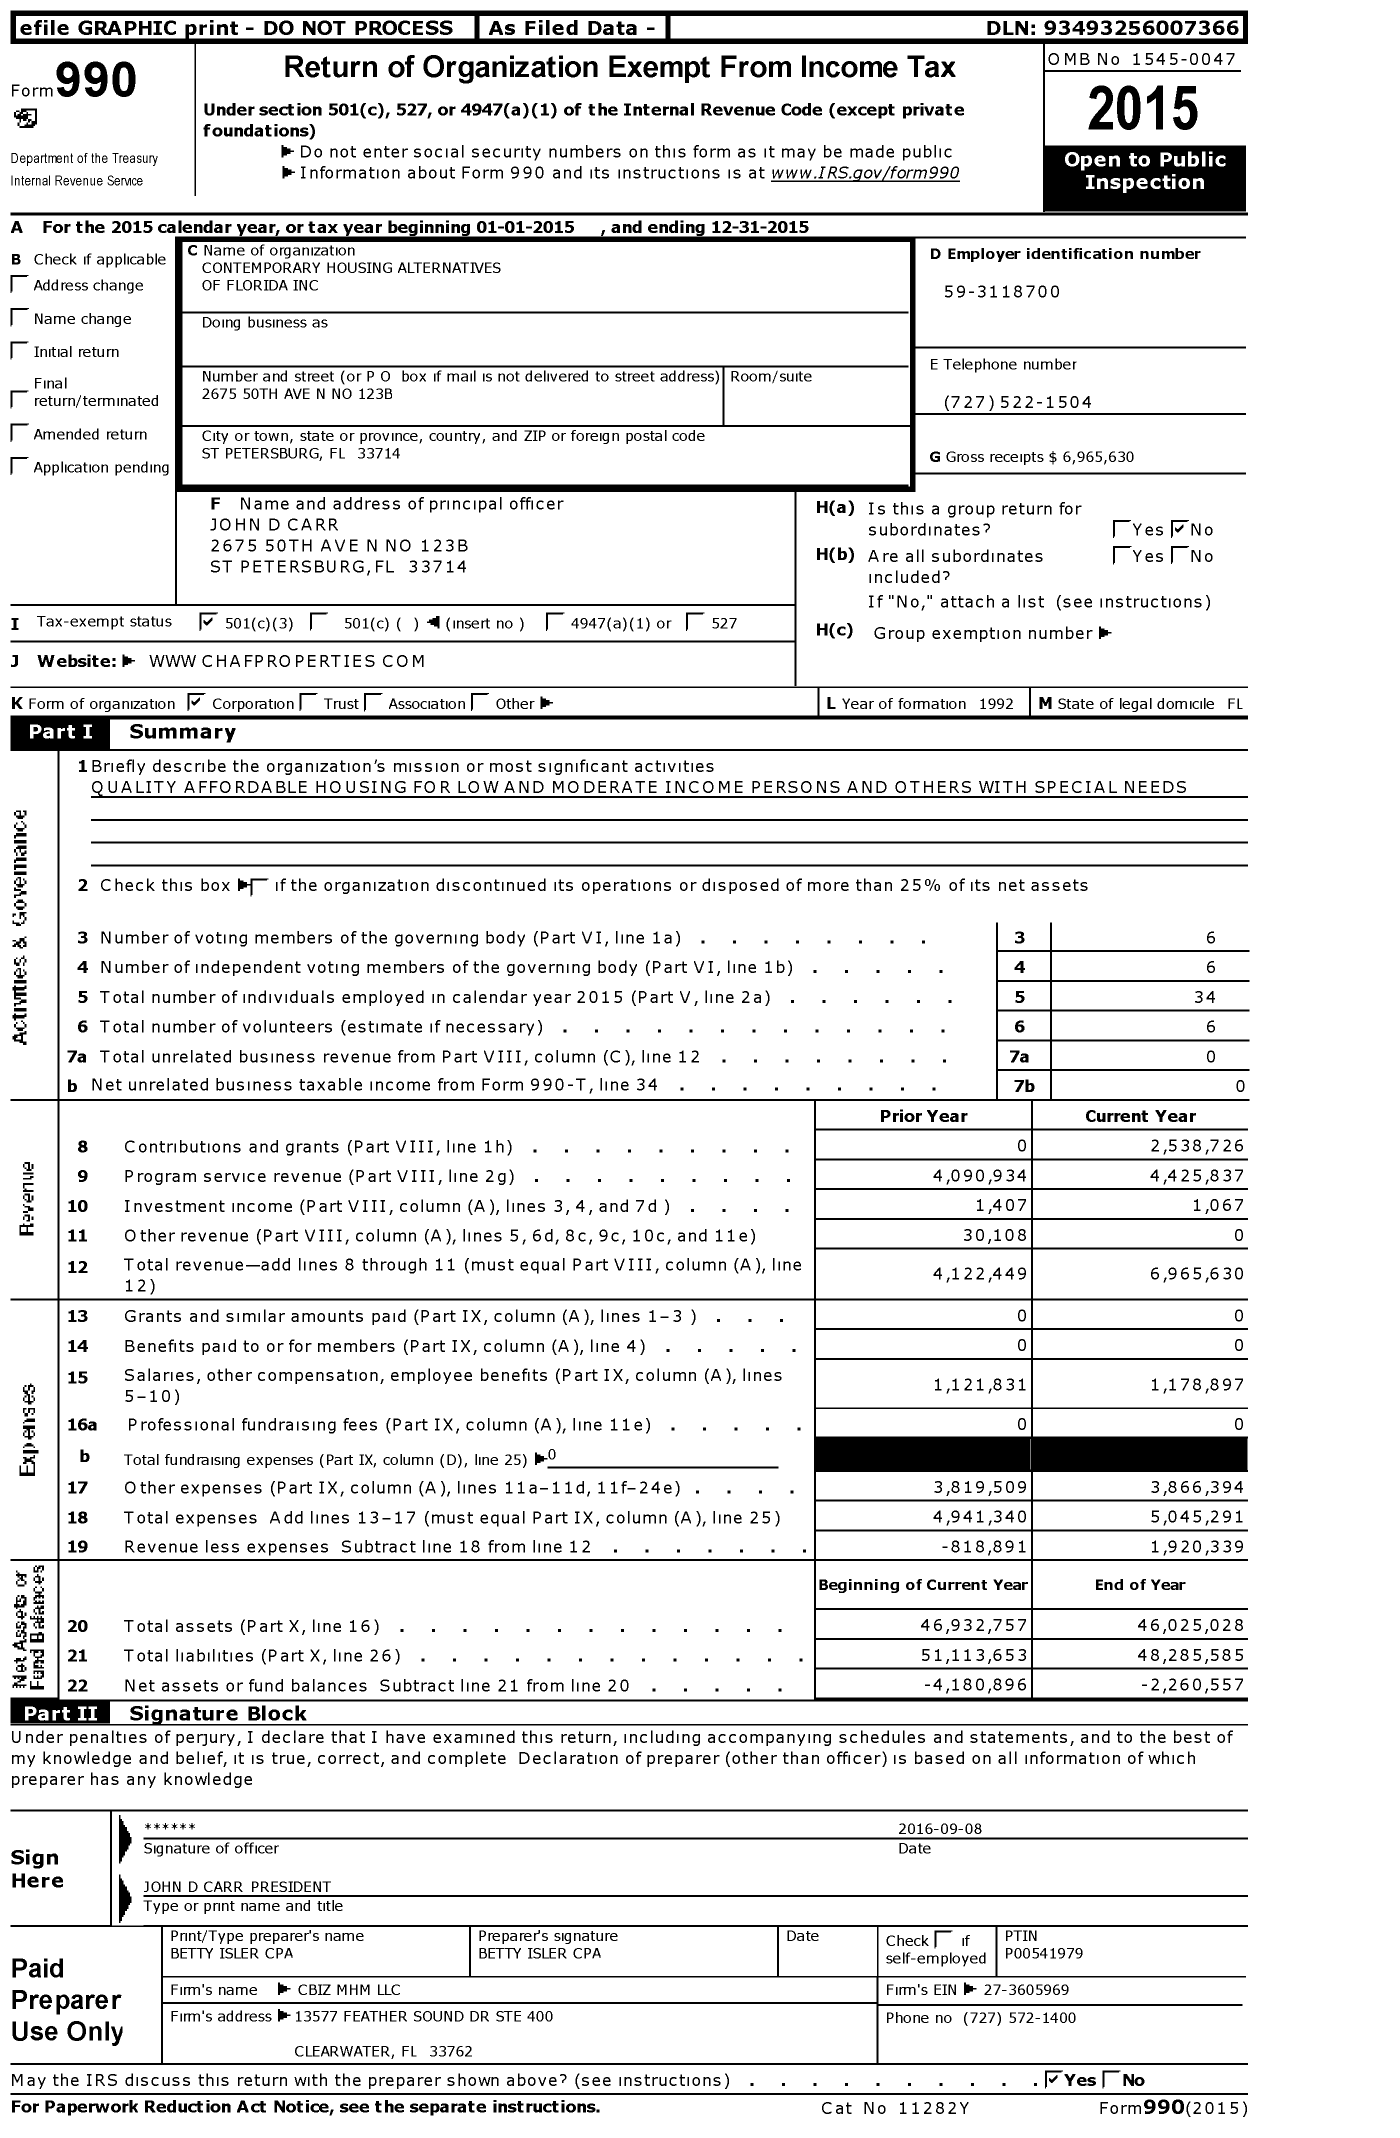 Image of first page of 2015 Form 990 for Contemporary Housing Alternatives of Florida (CHAF)